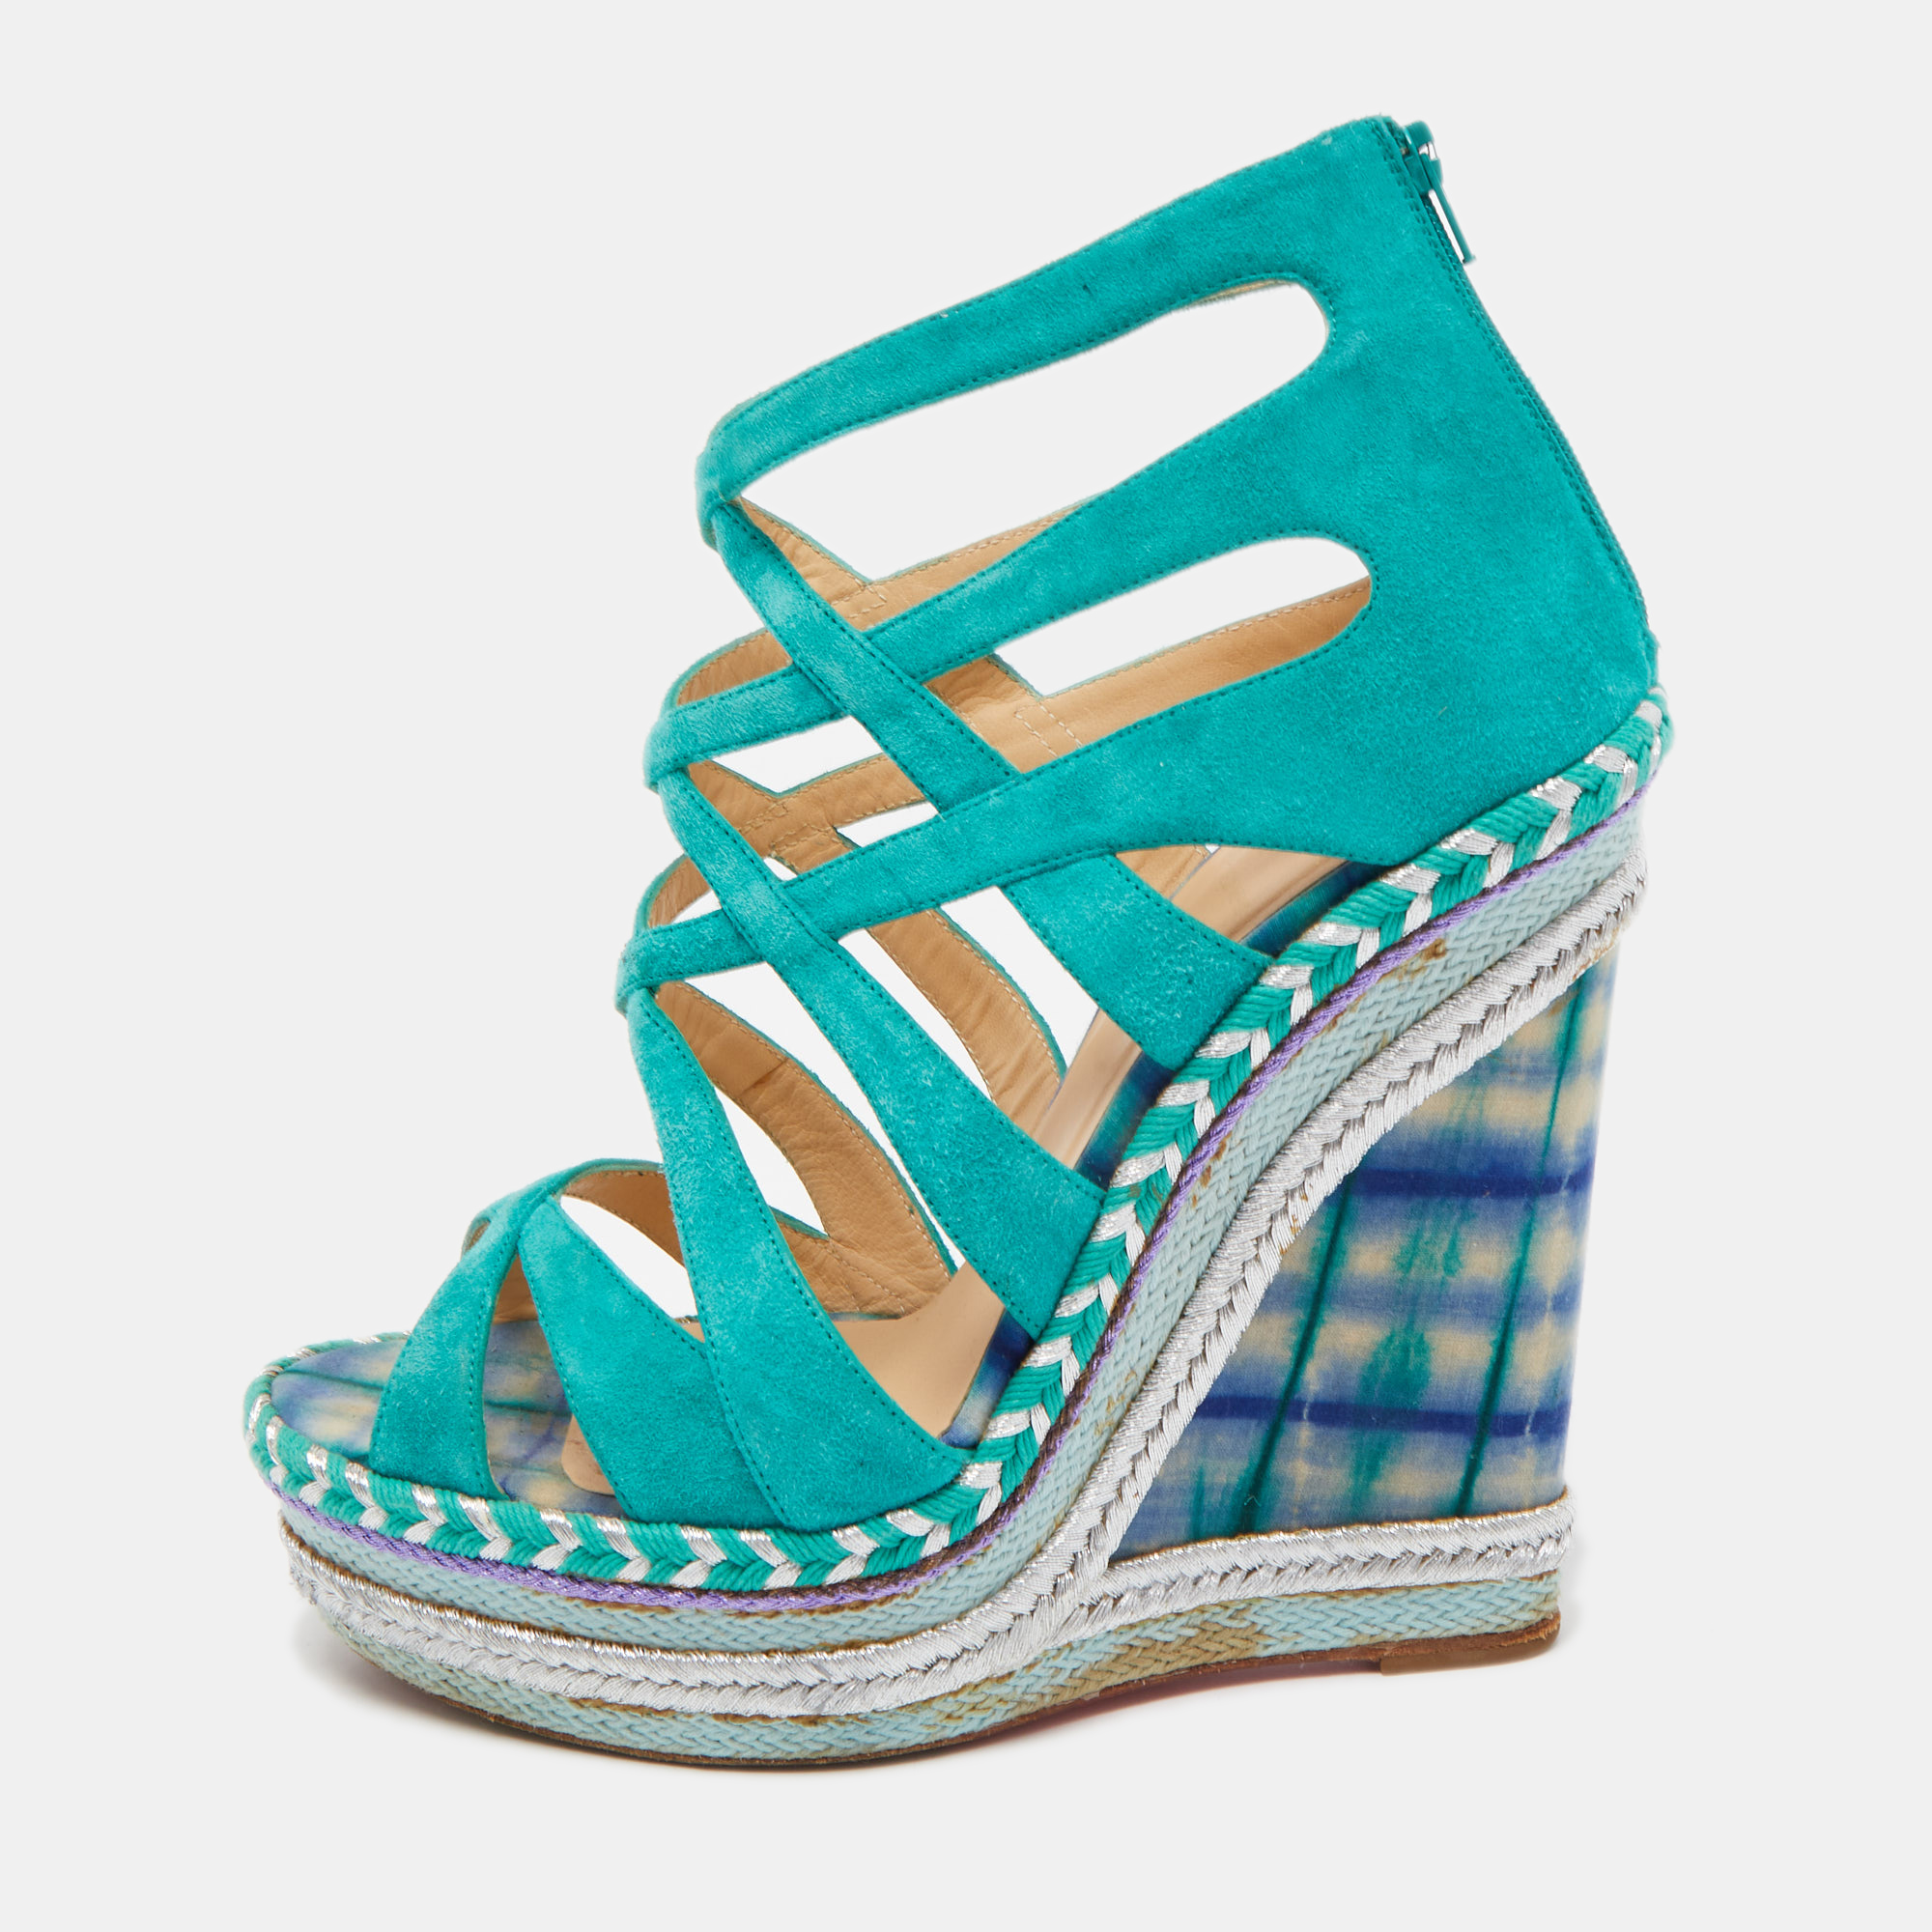 Pre-owned Christian Louboutin Green Suede Caged Espadrille Tosca Wedge Platform Sandals Size 39